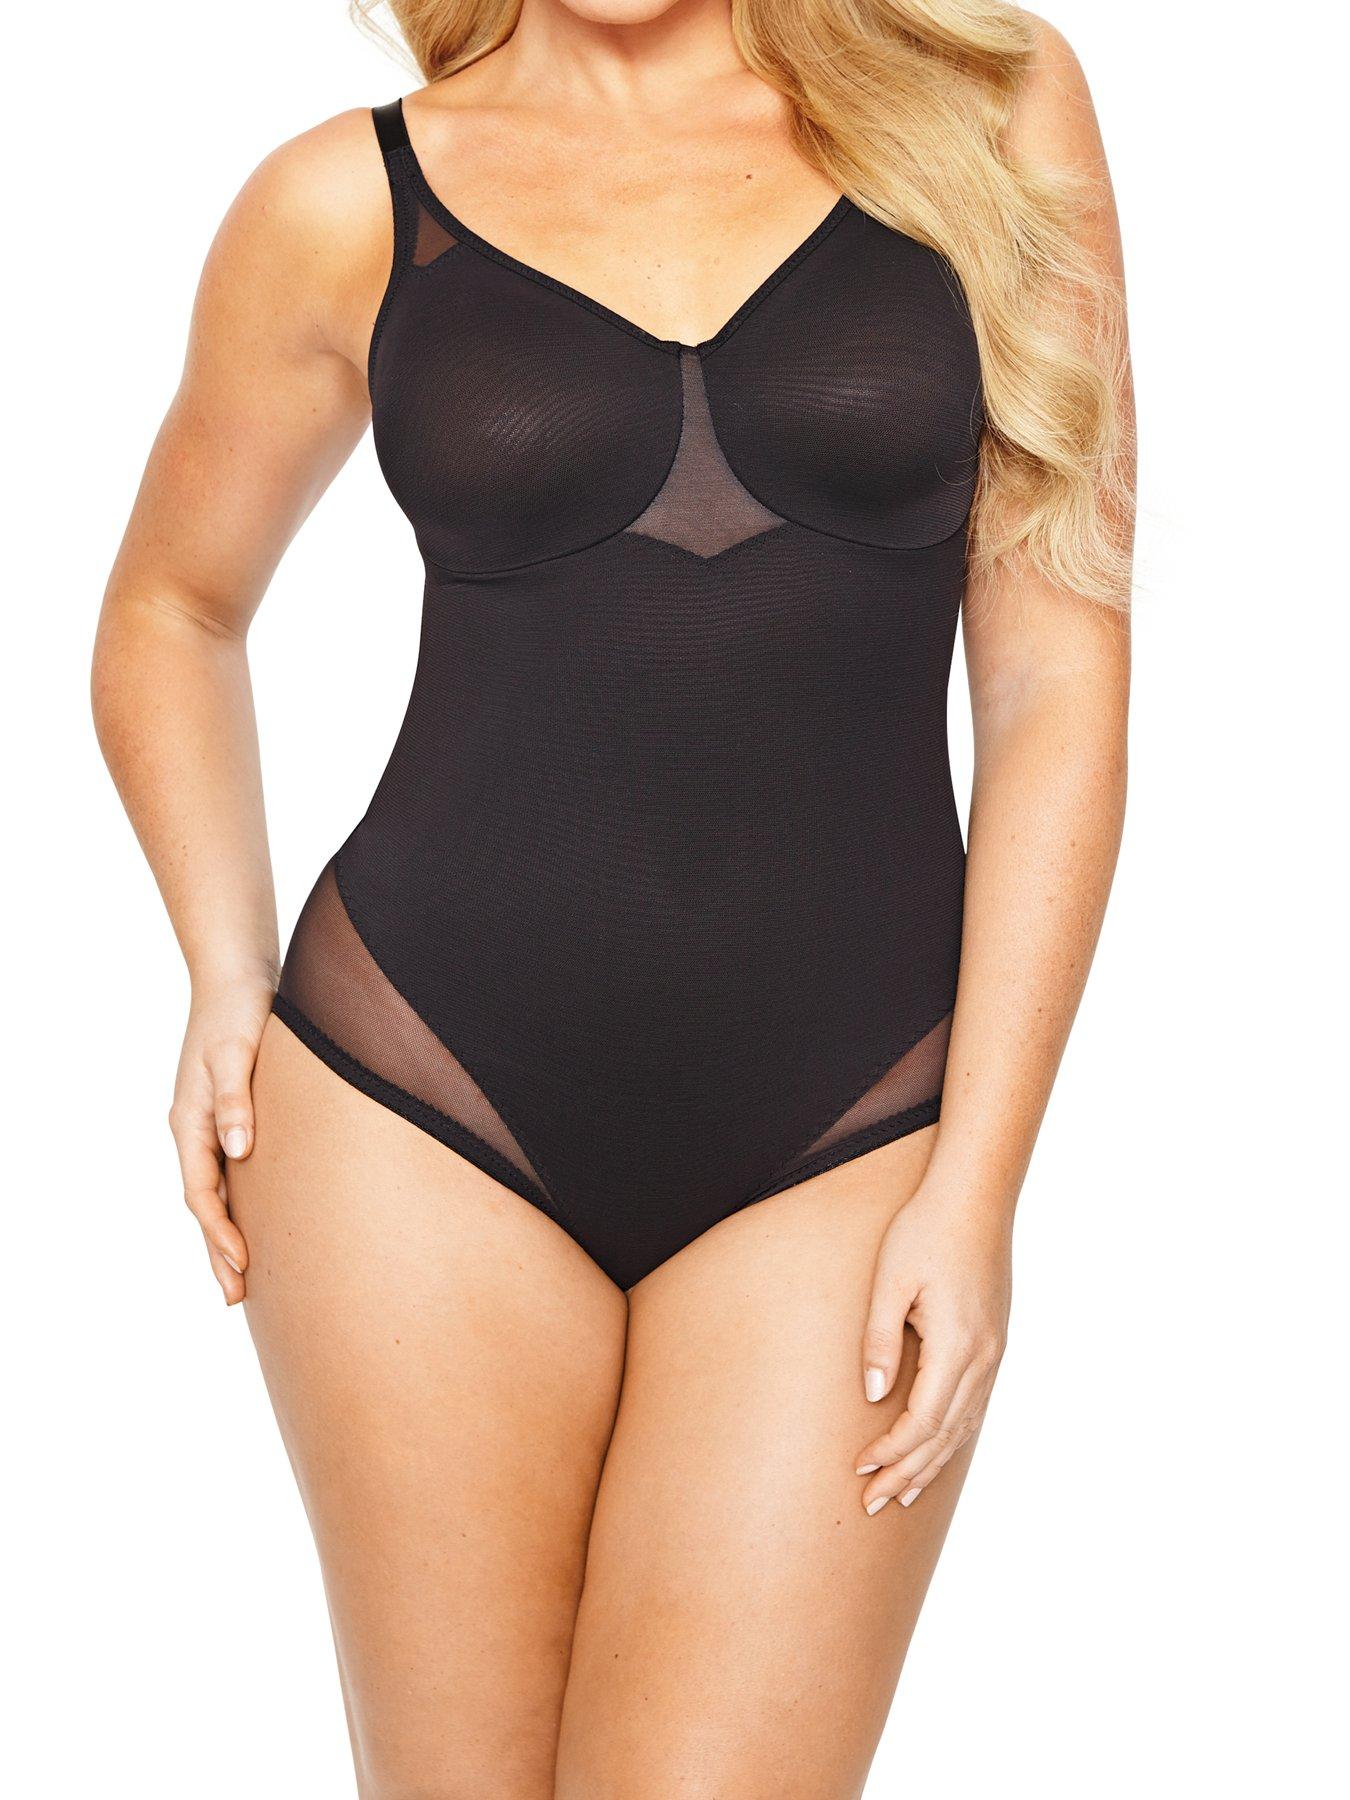 Miraclesuit Sexy Sheer Shaping Bodybriefer 2783